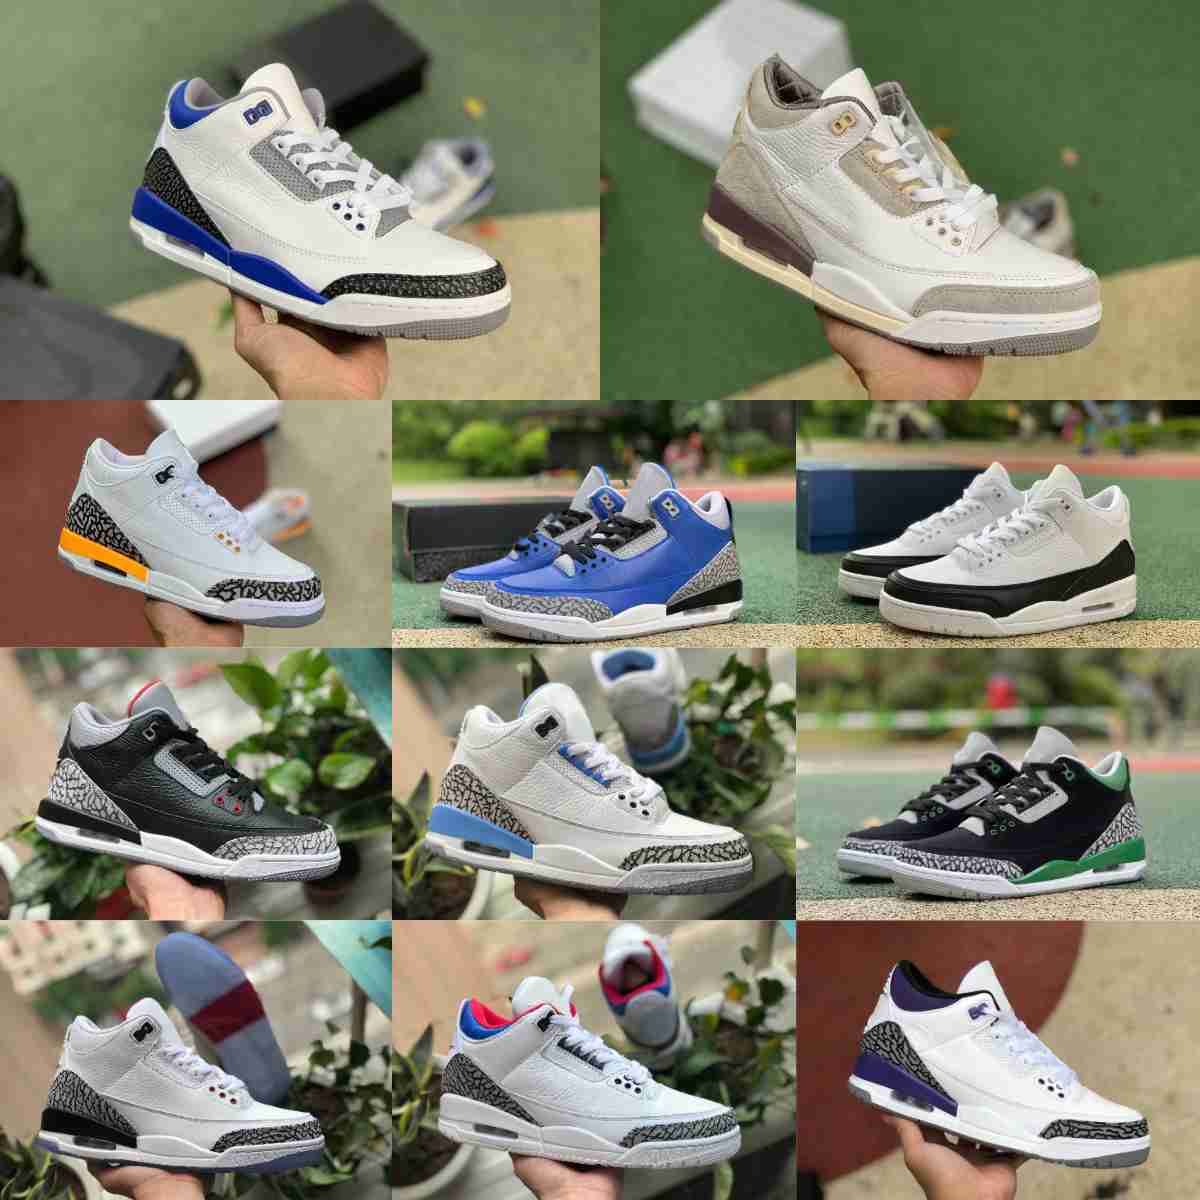 

Jumpman Racer Blue 3 3S Basketball Shoes Mens Dark Iirs Cool Knicks FREE THROW LINE Denim Red Black Cement Pure White Grey A Ma Maniere UNC Fragment Trainer Sneakers S28, Please contact us